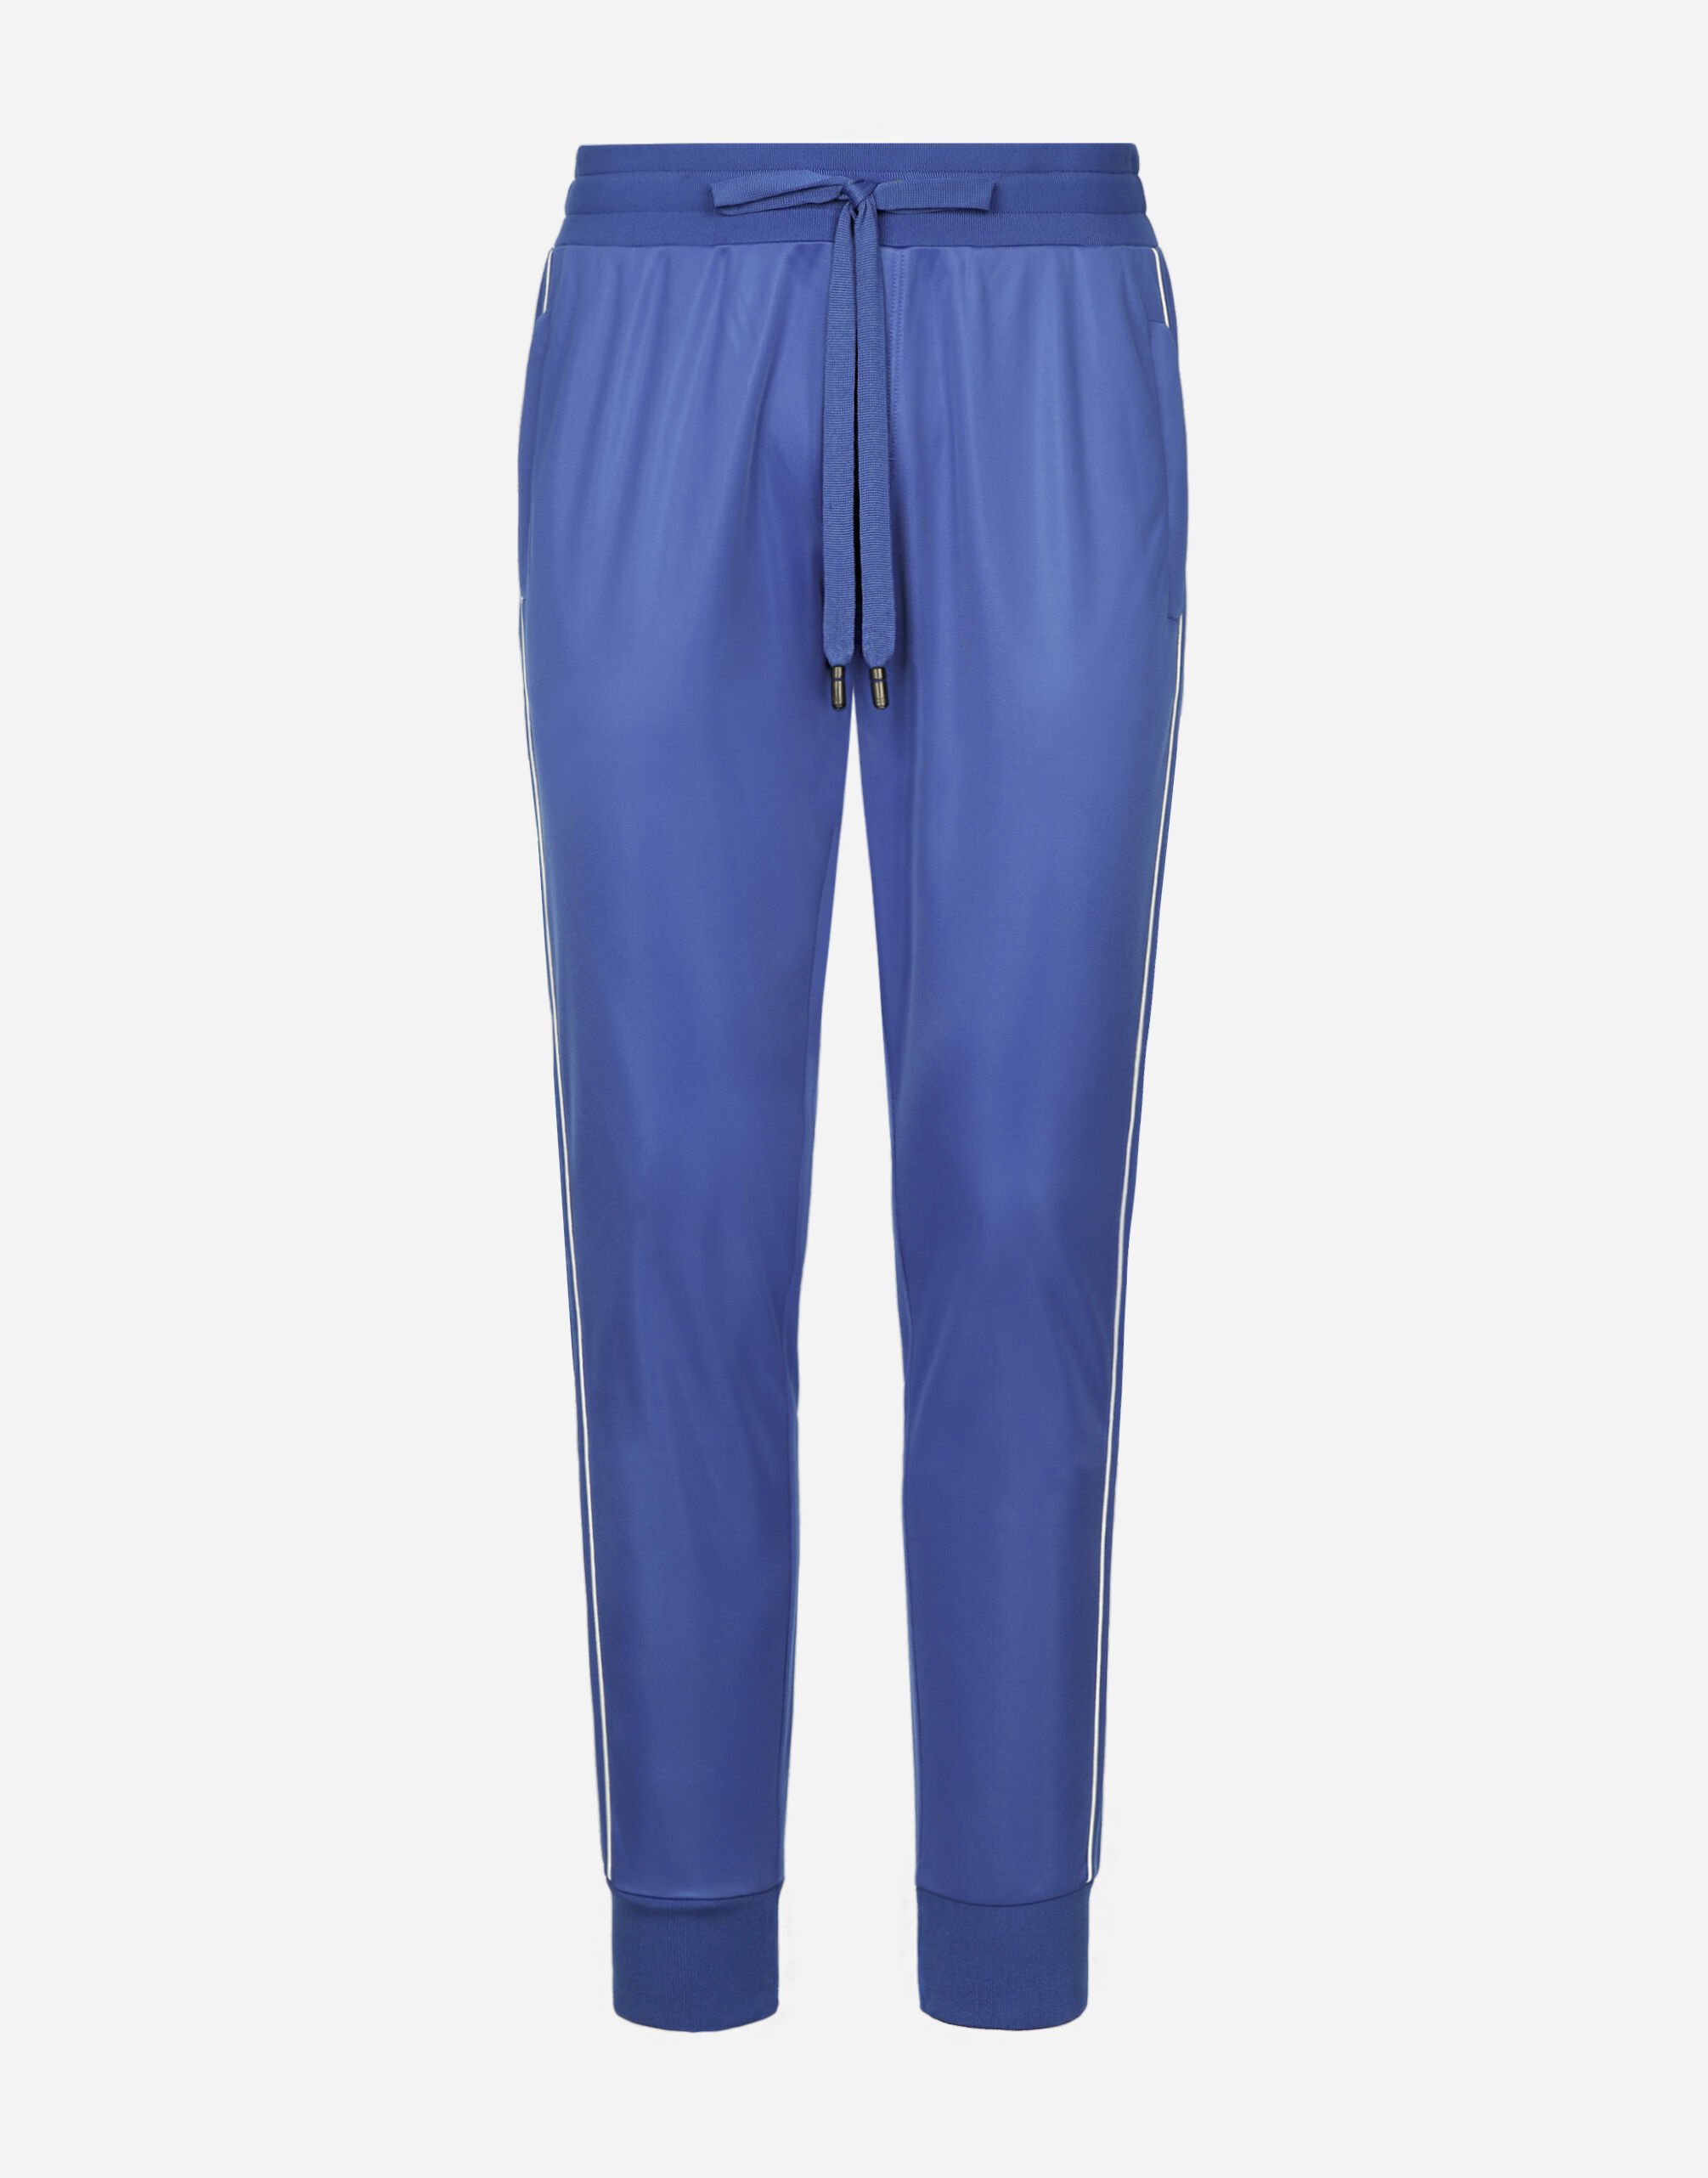 Dolce&Gabbana Triacetate jogging pants with bands Blue G8PL4TG7F2H